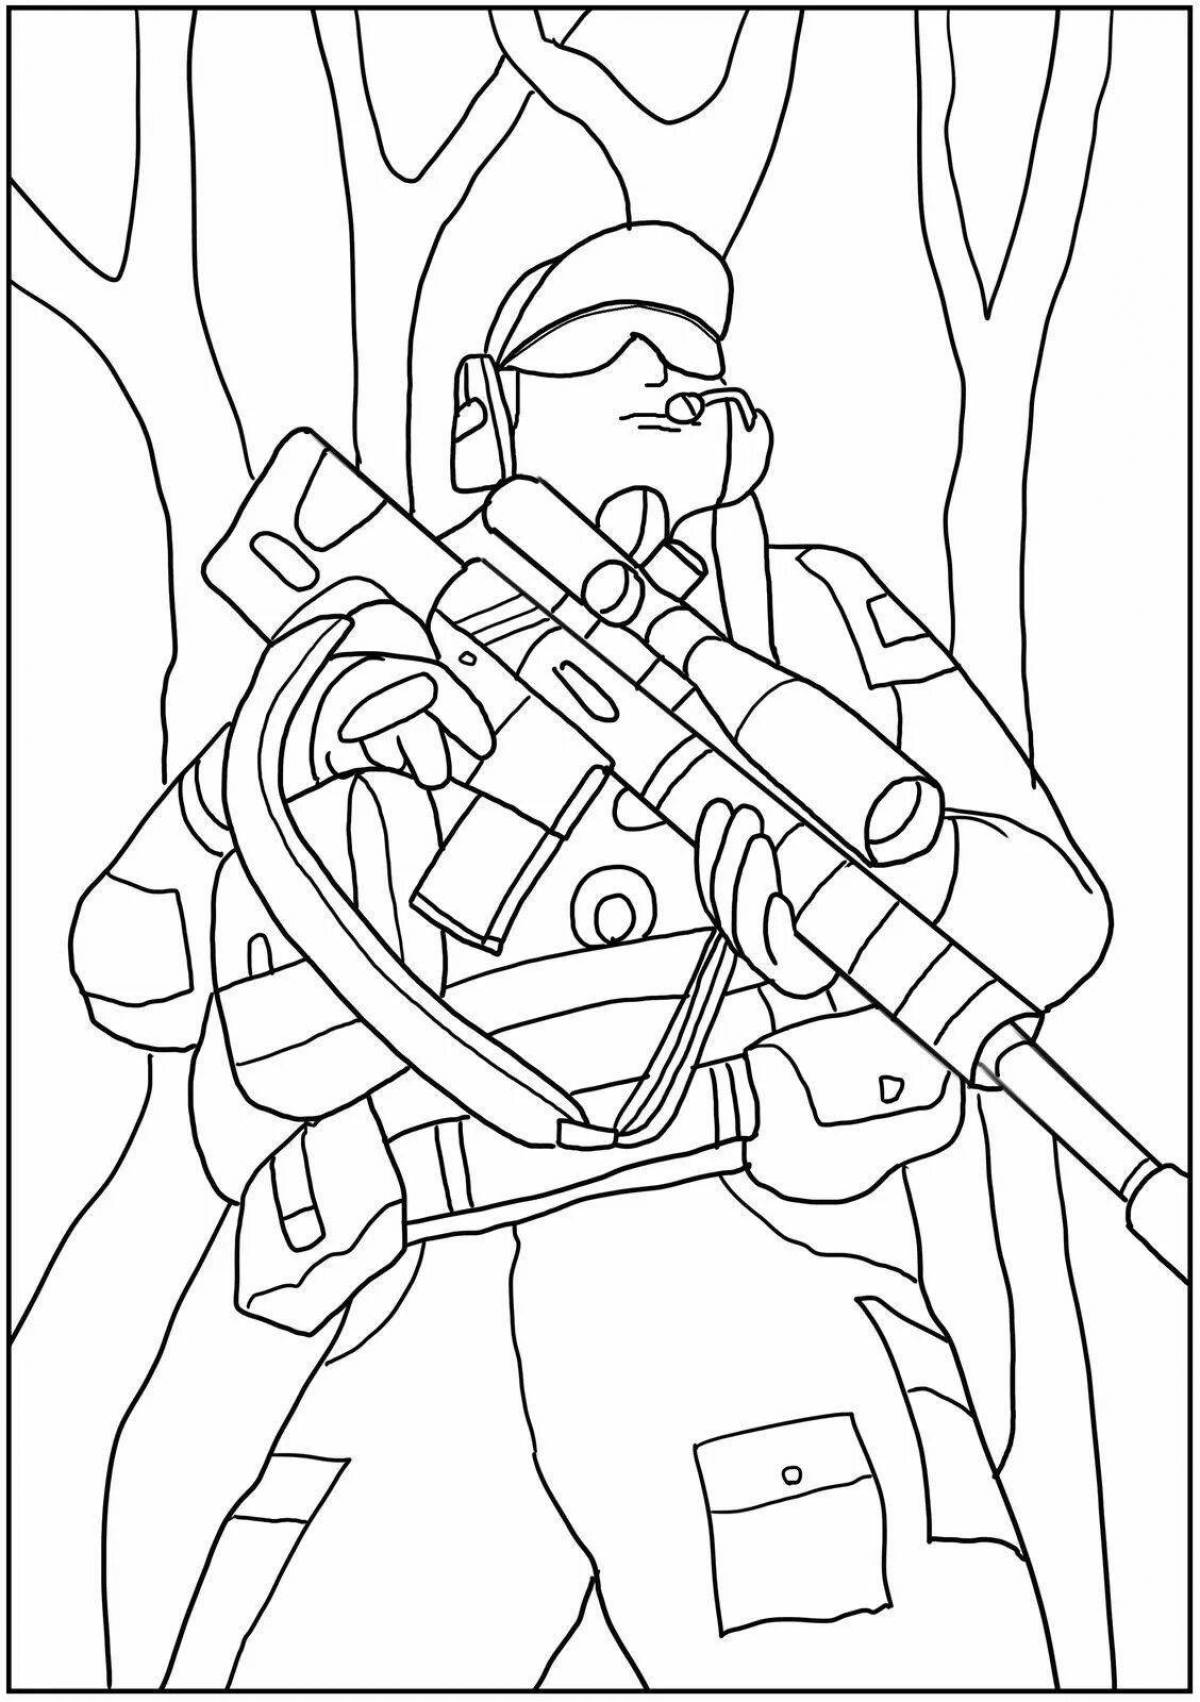 Outstanding swat coloring book for boys